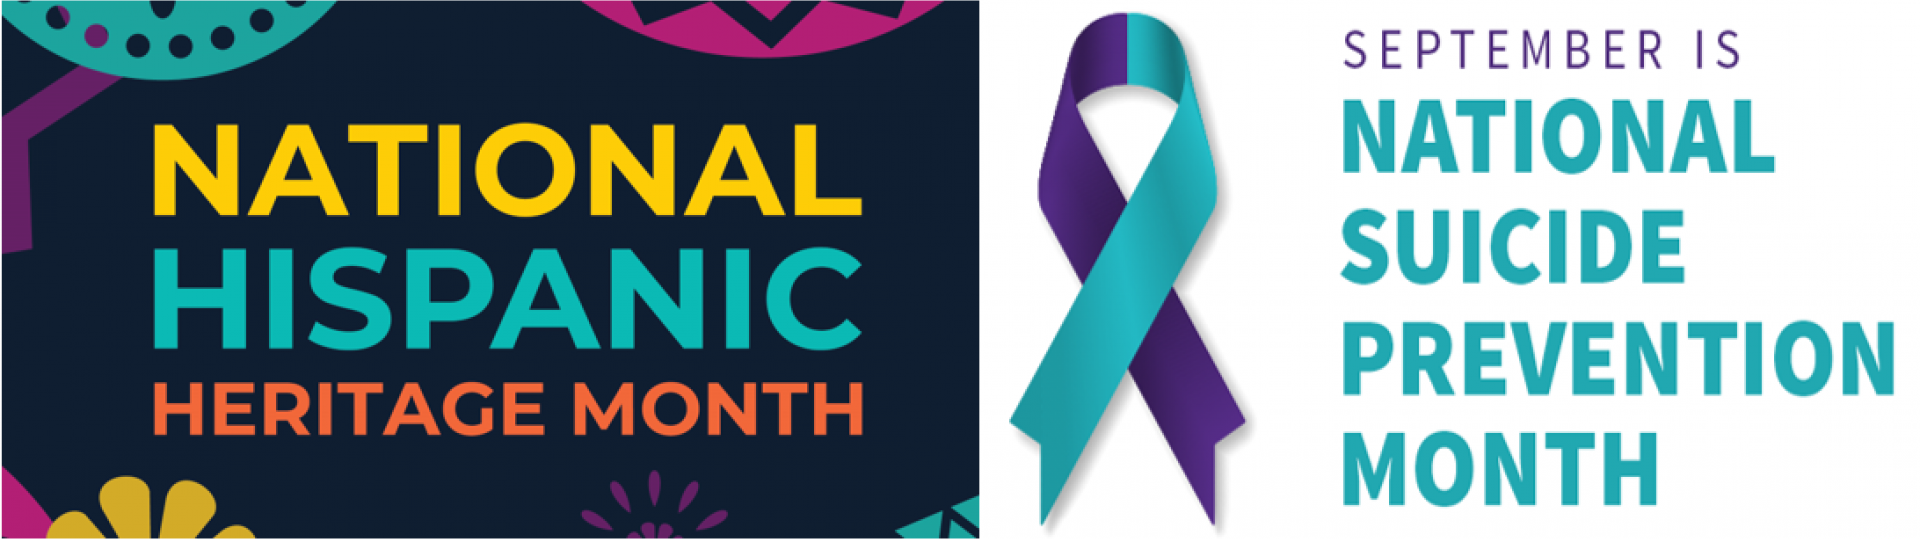 National Hispanic Heritage Month, Suicide Prevention Awareness Month 